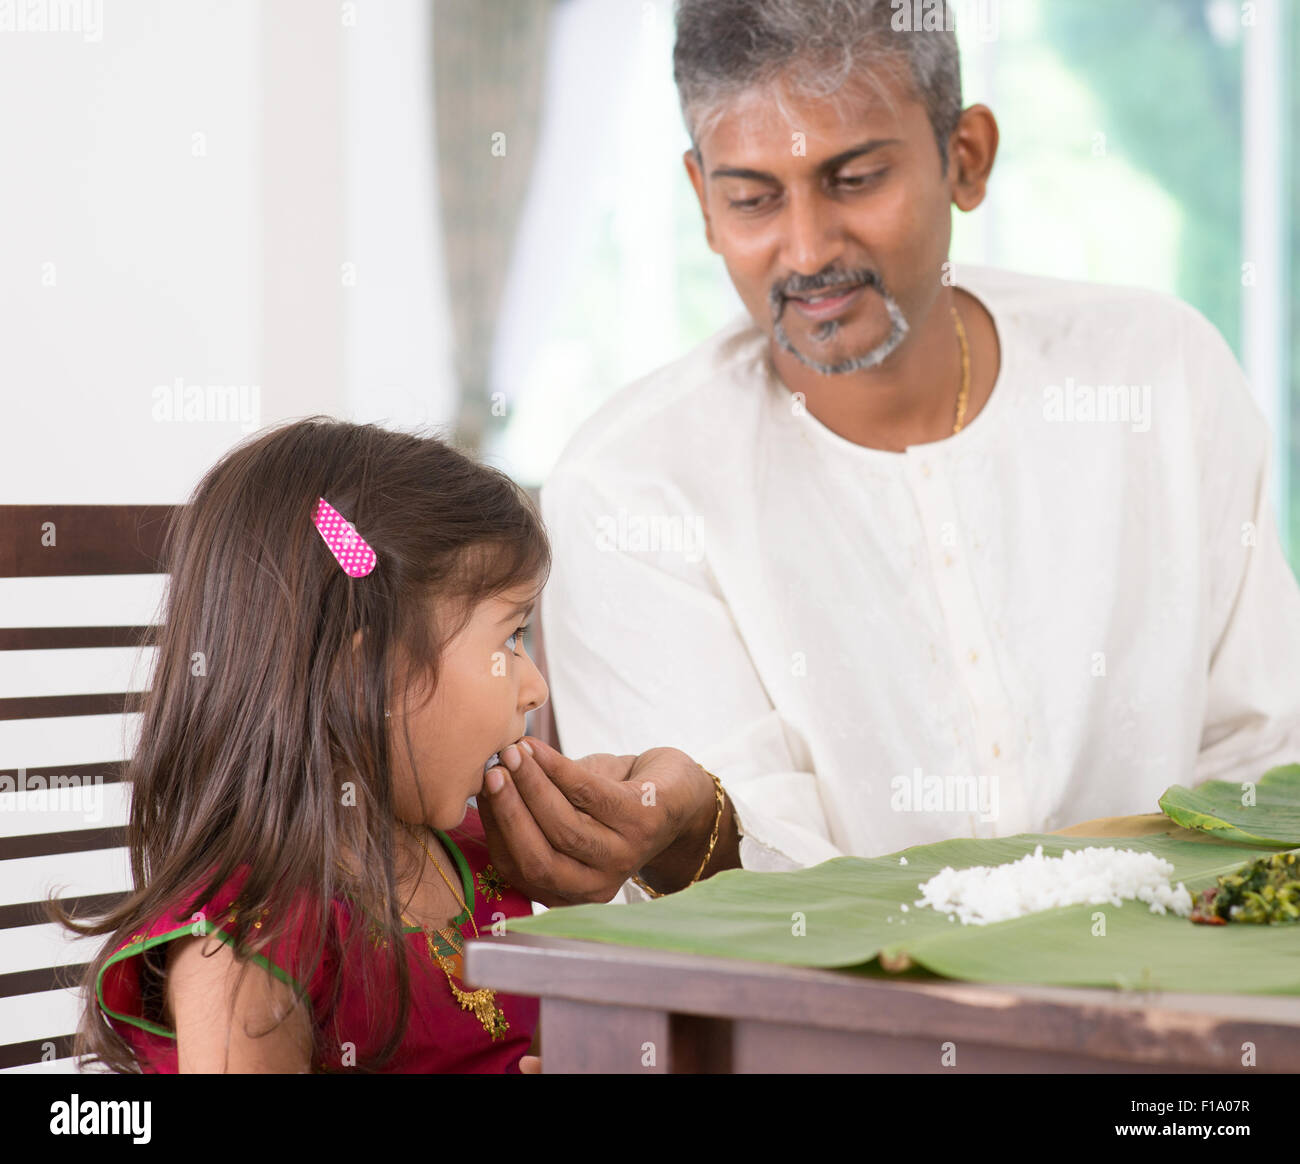 Indian family dining at home. Candid photo of India people eating rice with hands. Parent feeding child. Stock Photo